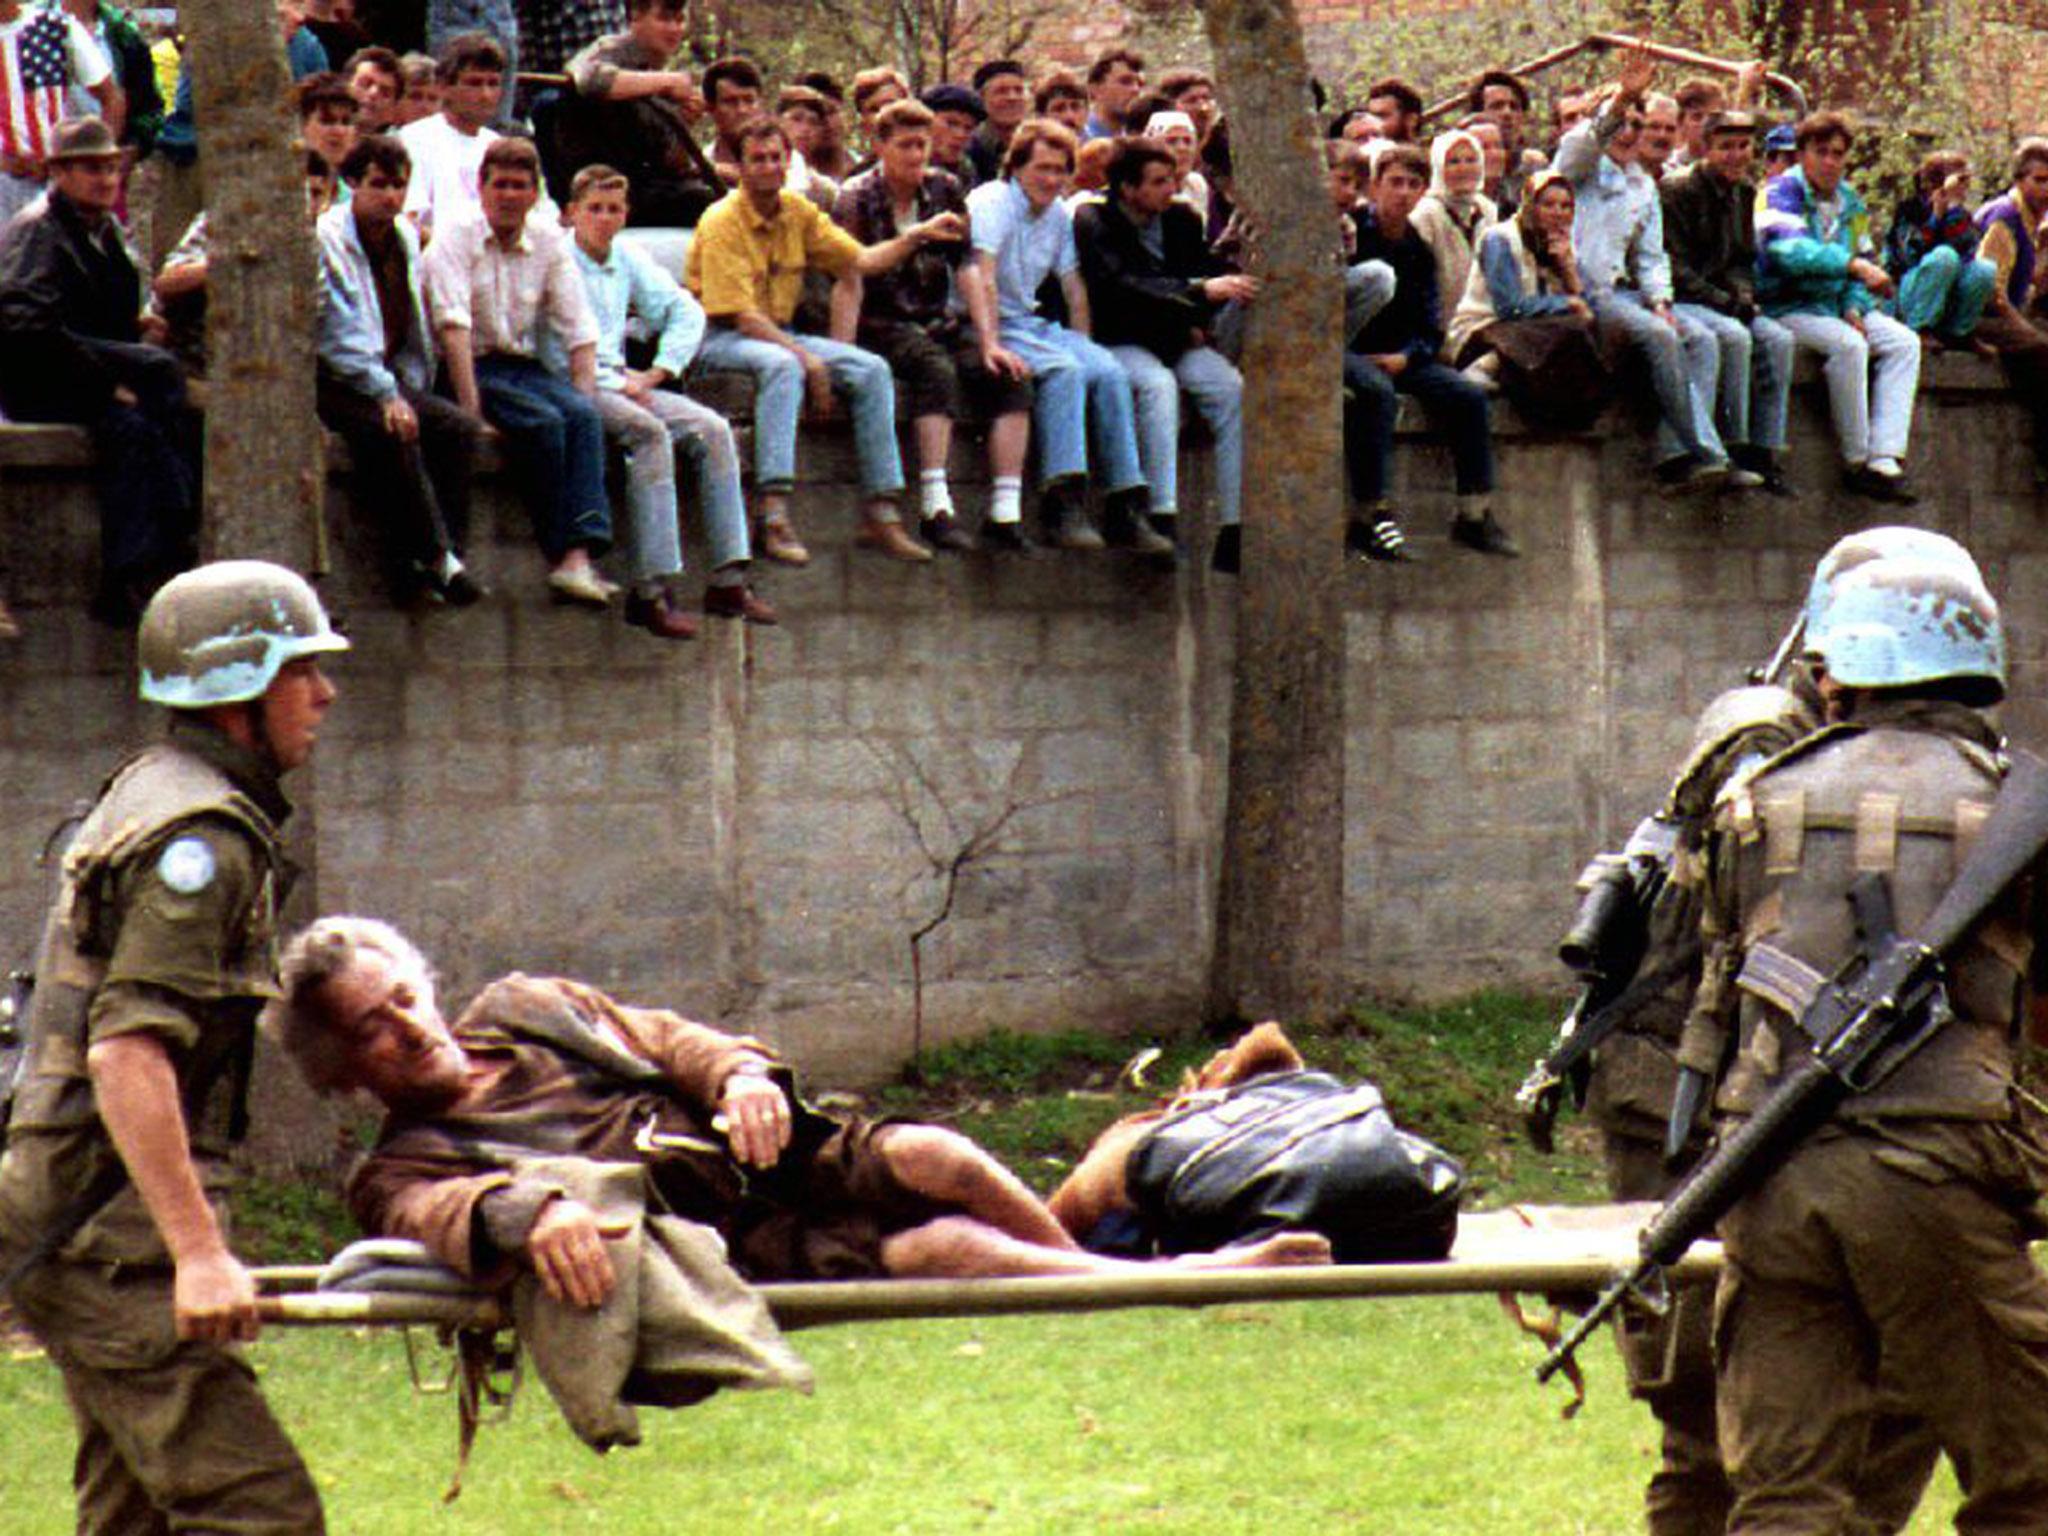 The 1993 Srebrenica massacre: another collective failure by the international community